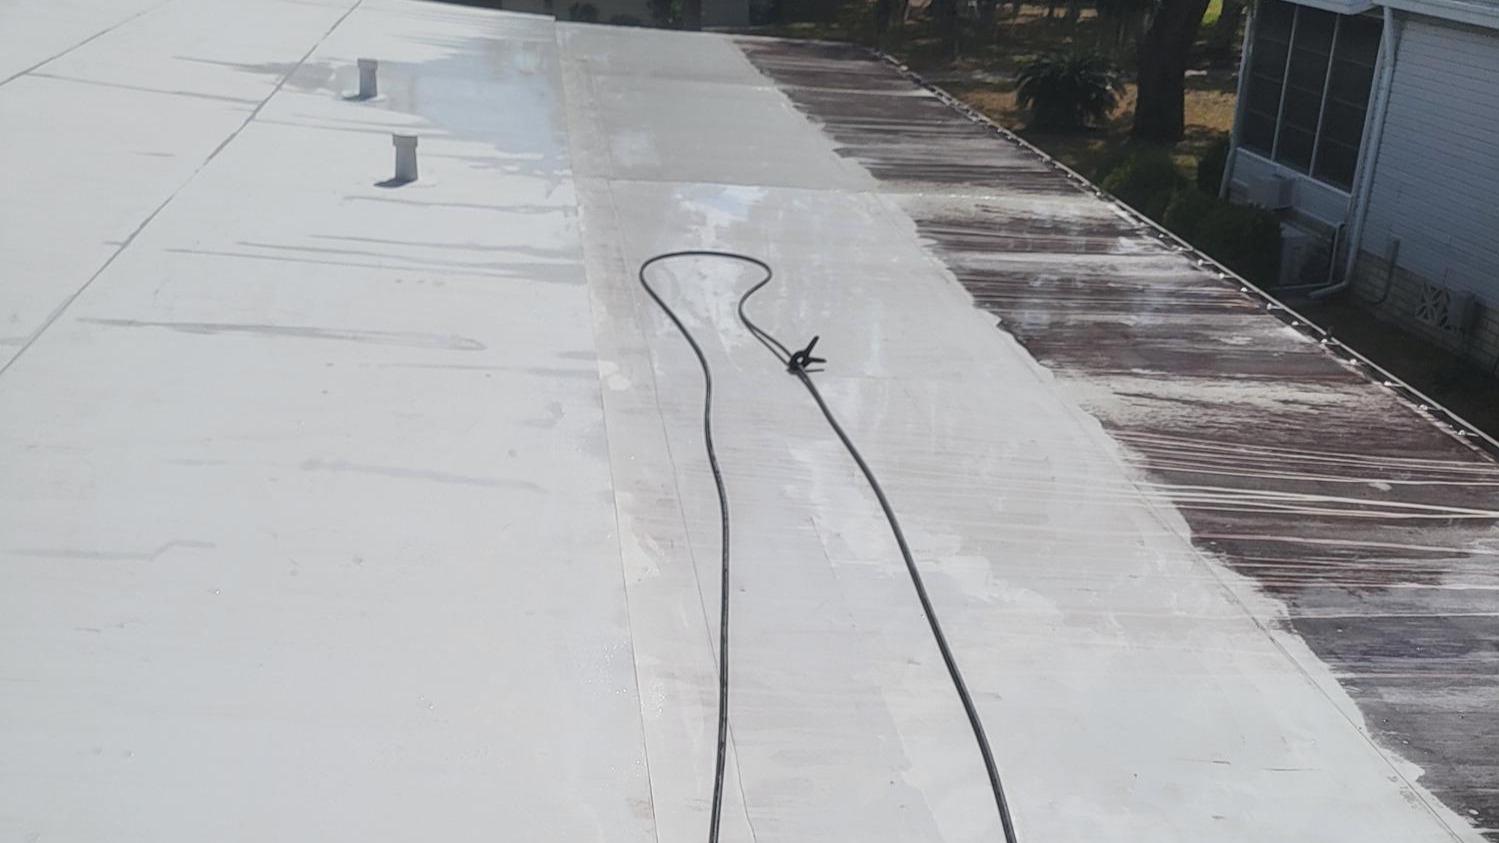 Restore the beauty and longevity of your roof with Grego's Power Washing and Property Maintenance professional roof cleaning services. Our expert team will safely remove algae, moss, and debris, improving the curb appeal and integrity of your roof. Count on Grego's for reliable and efficient roof cleaning solutions that protect your investment.